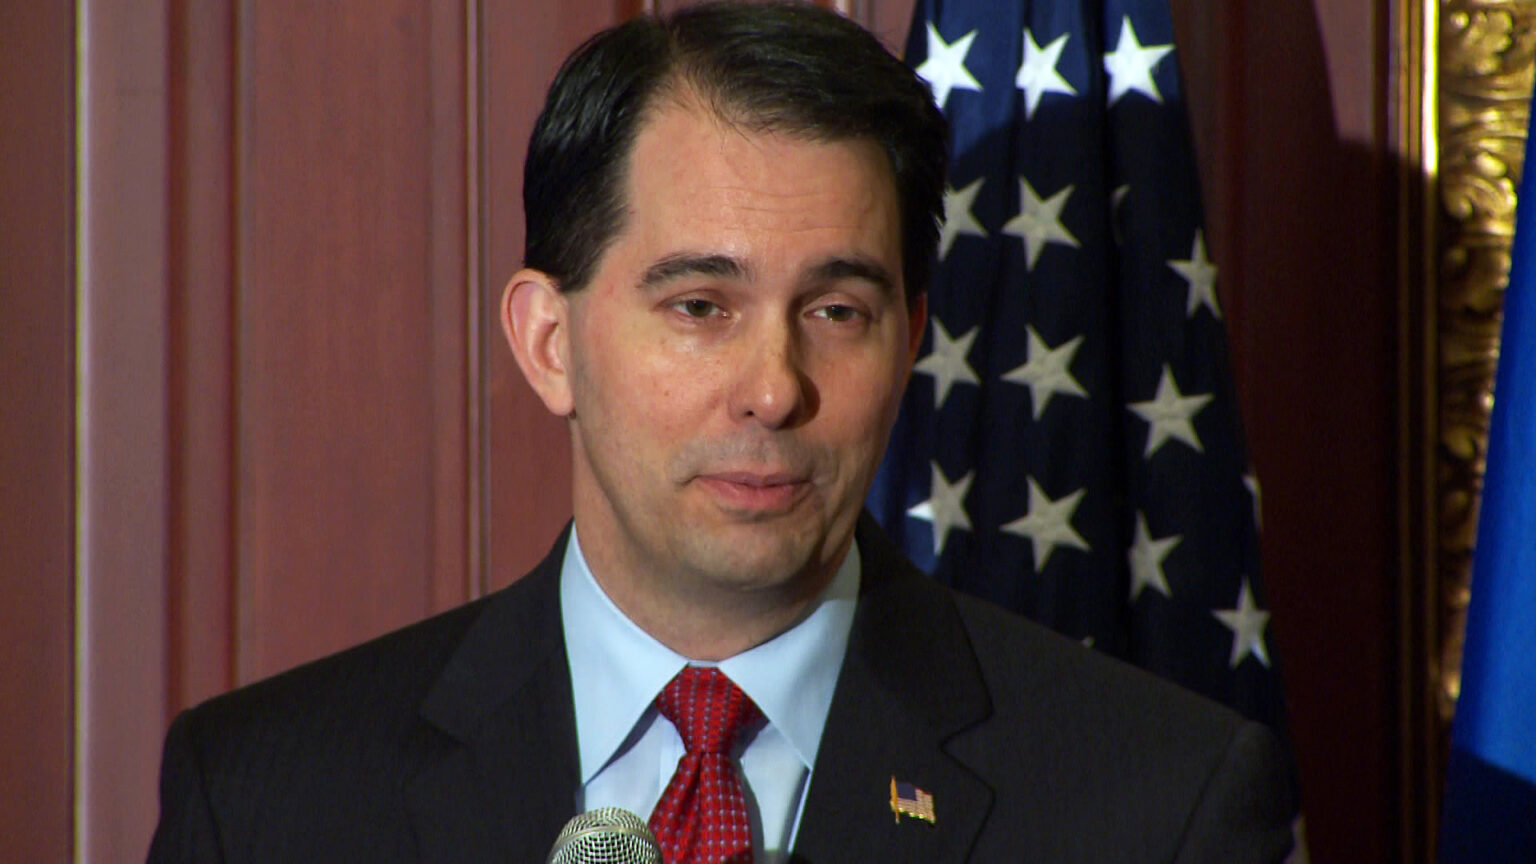 Scott Walker stands and speaks into a microphone while standing in front of a U.S. flag and wood wall paneling.